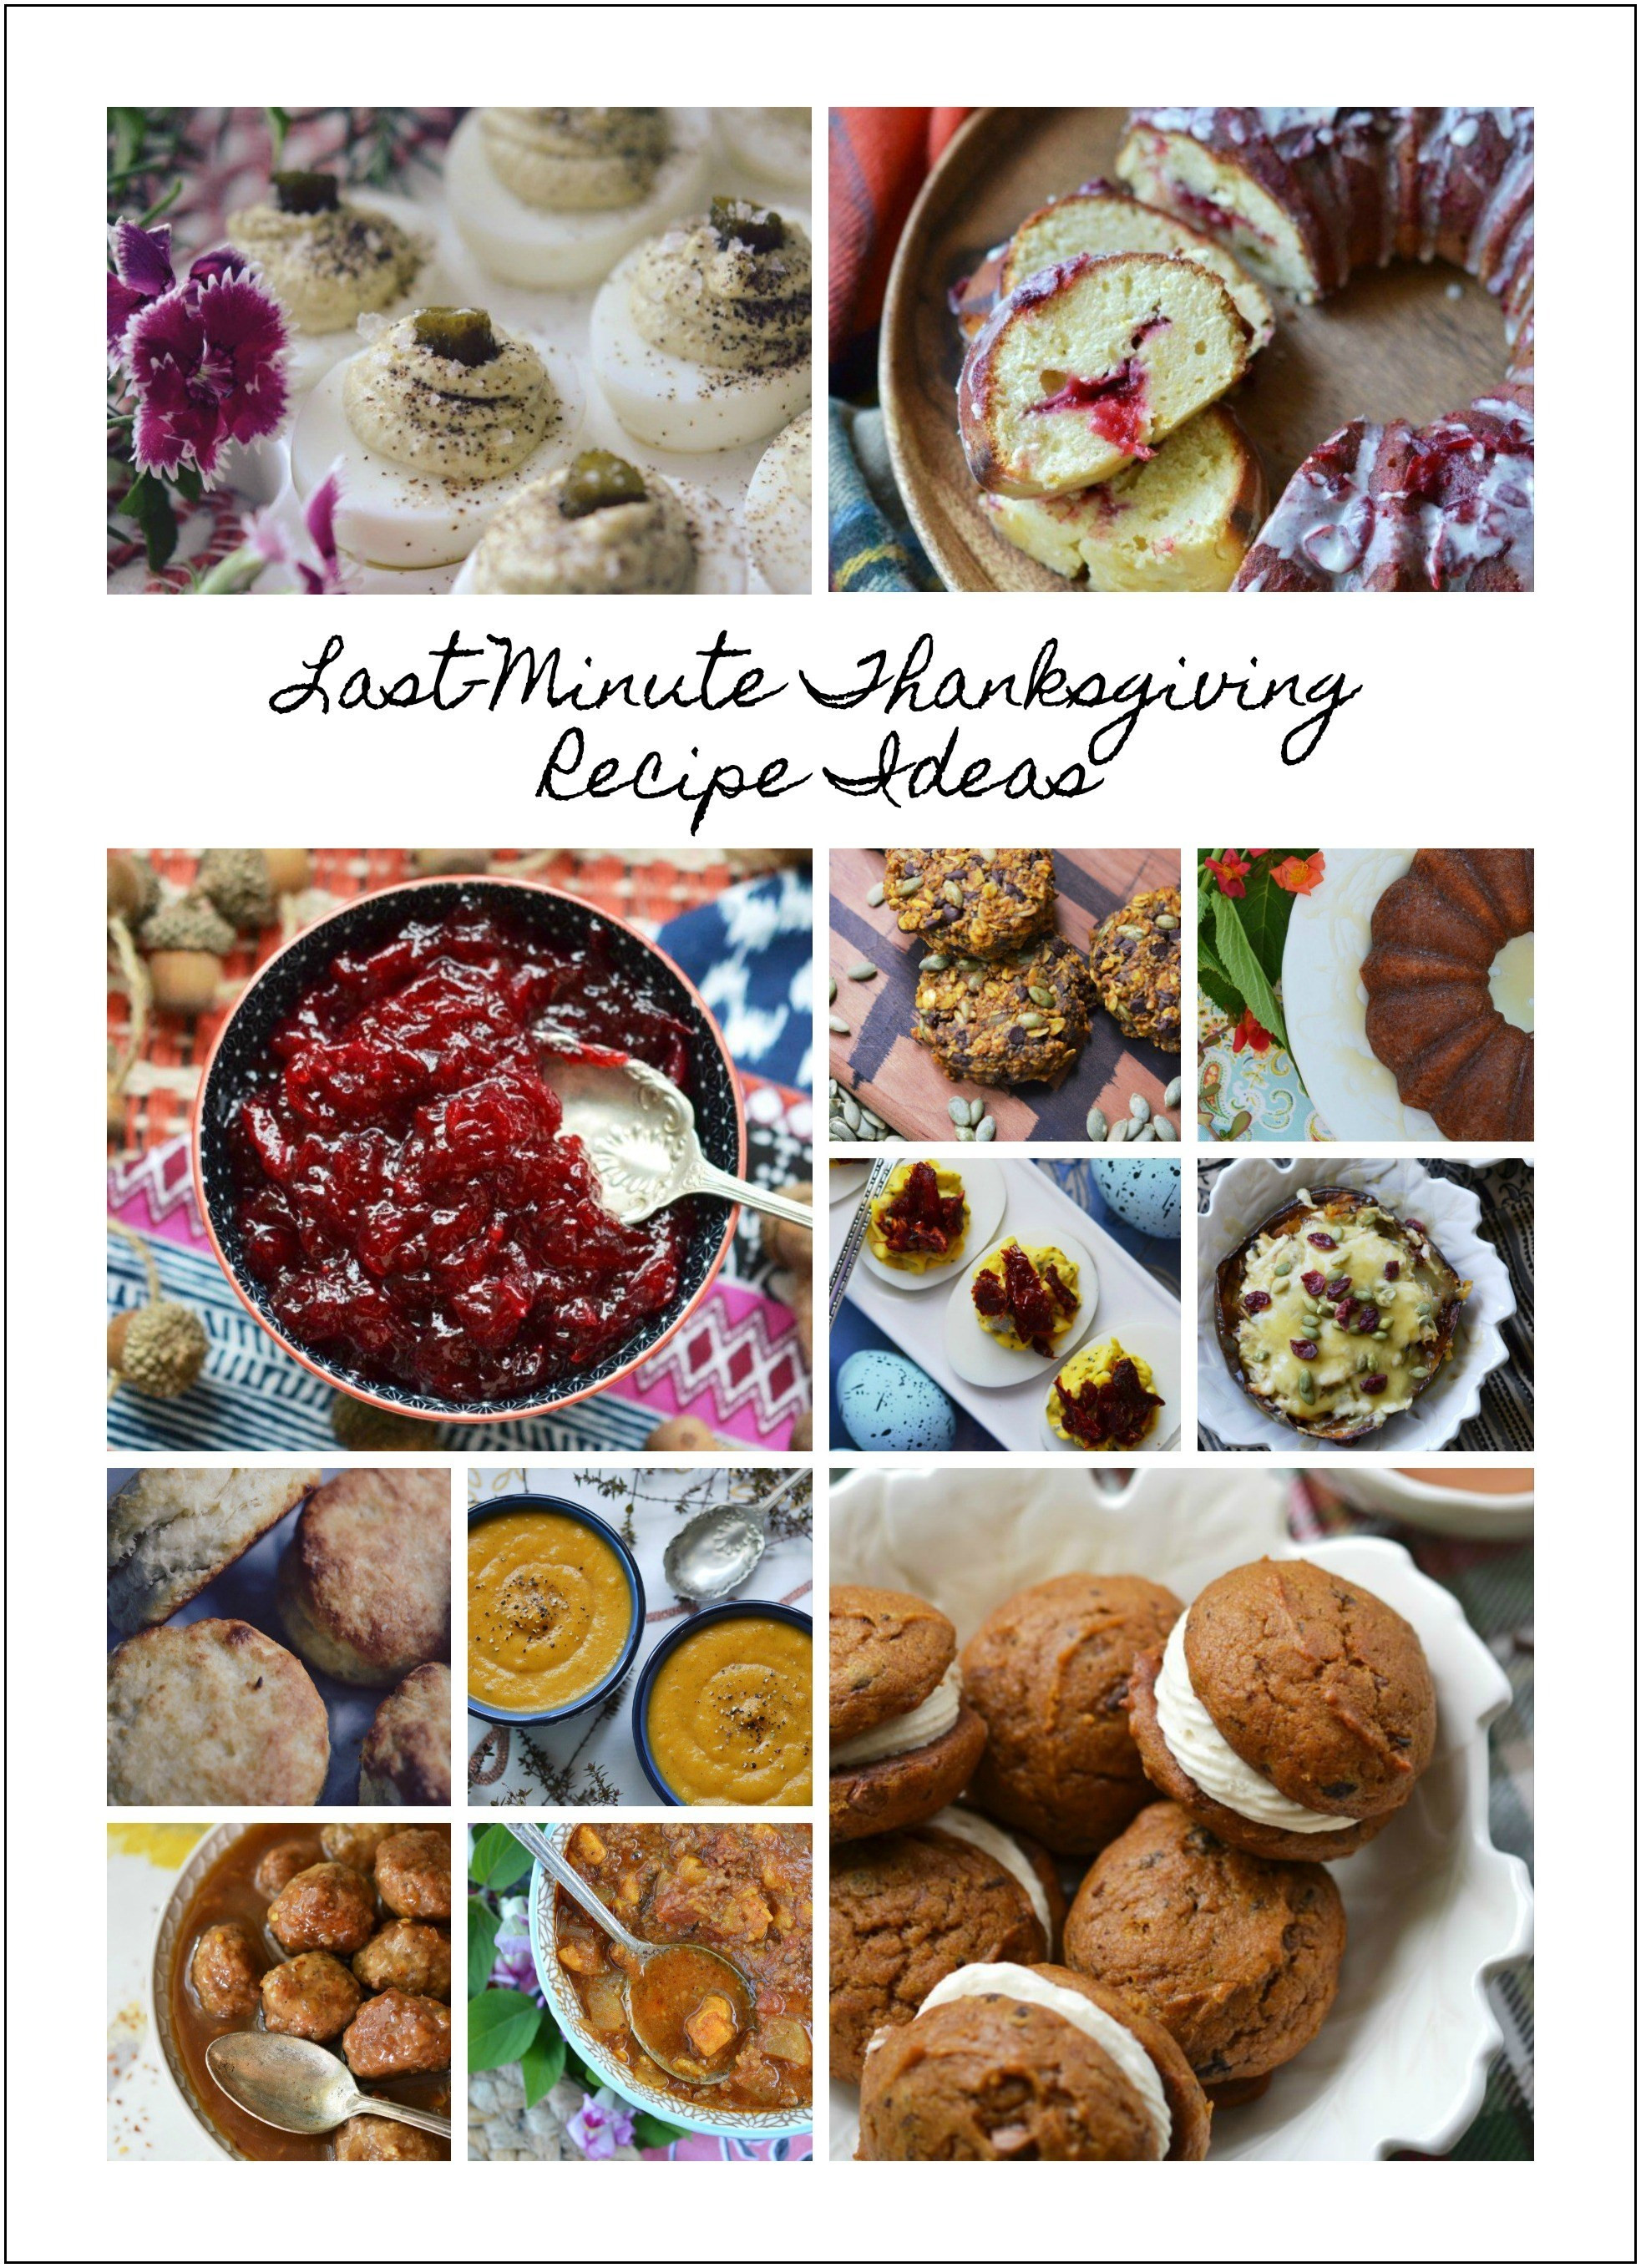 Thanksgiving Dinner Ideas Without Turkey
 Last Minute Thanksgiving Recipe Ideas – 2017